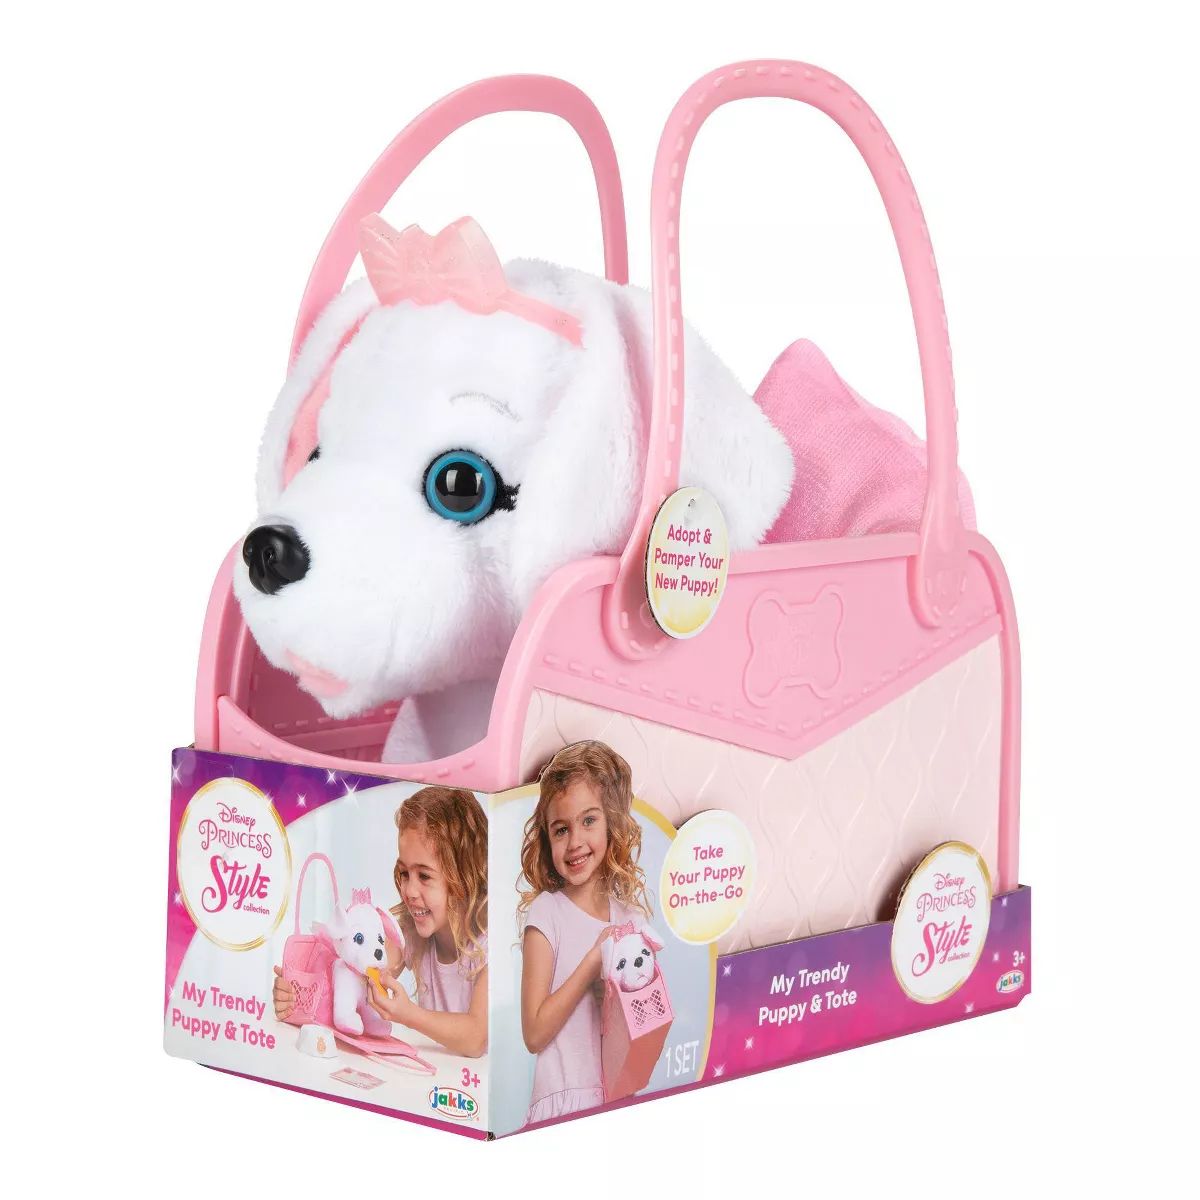 Disney Princess Style Collection My Trendy Puppy & Tote | Target